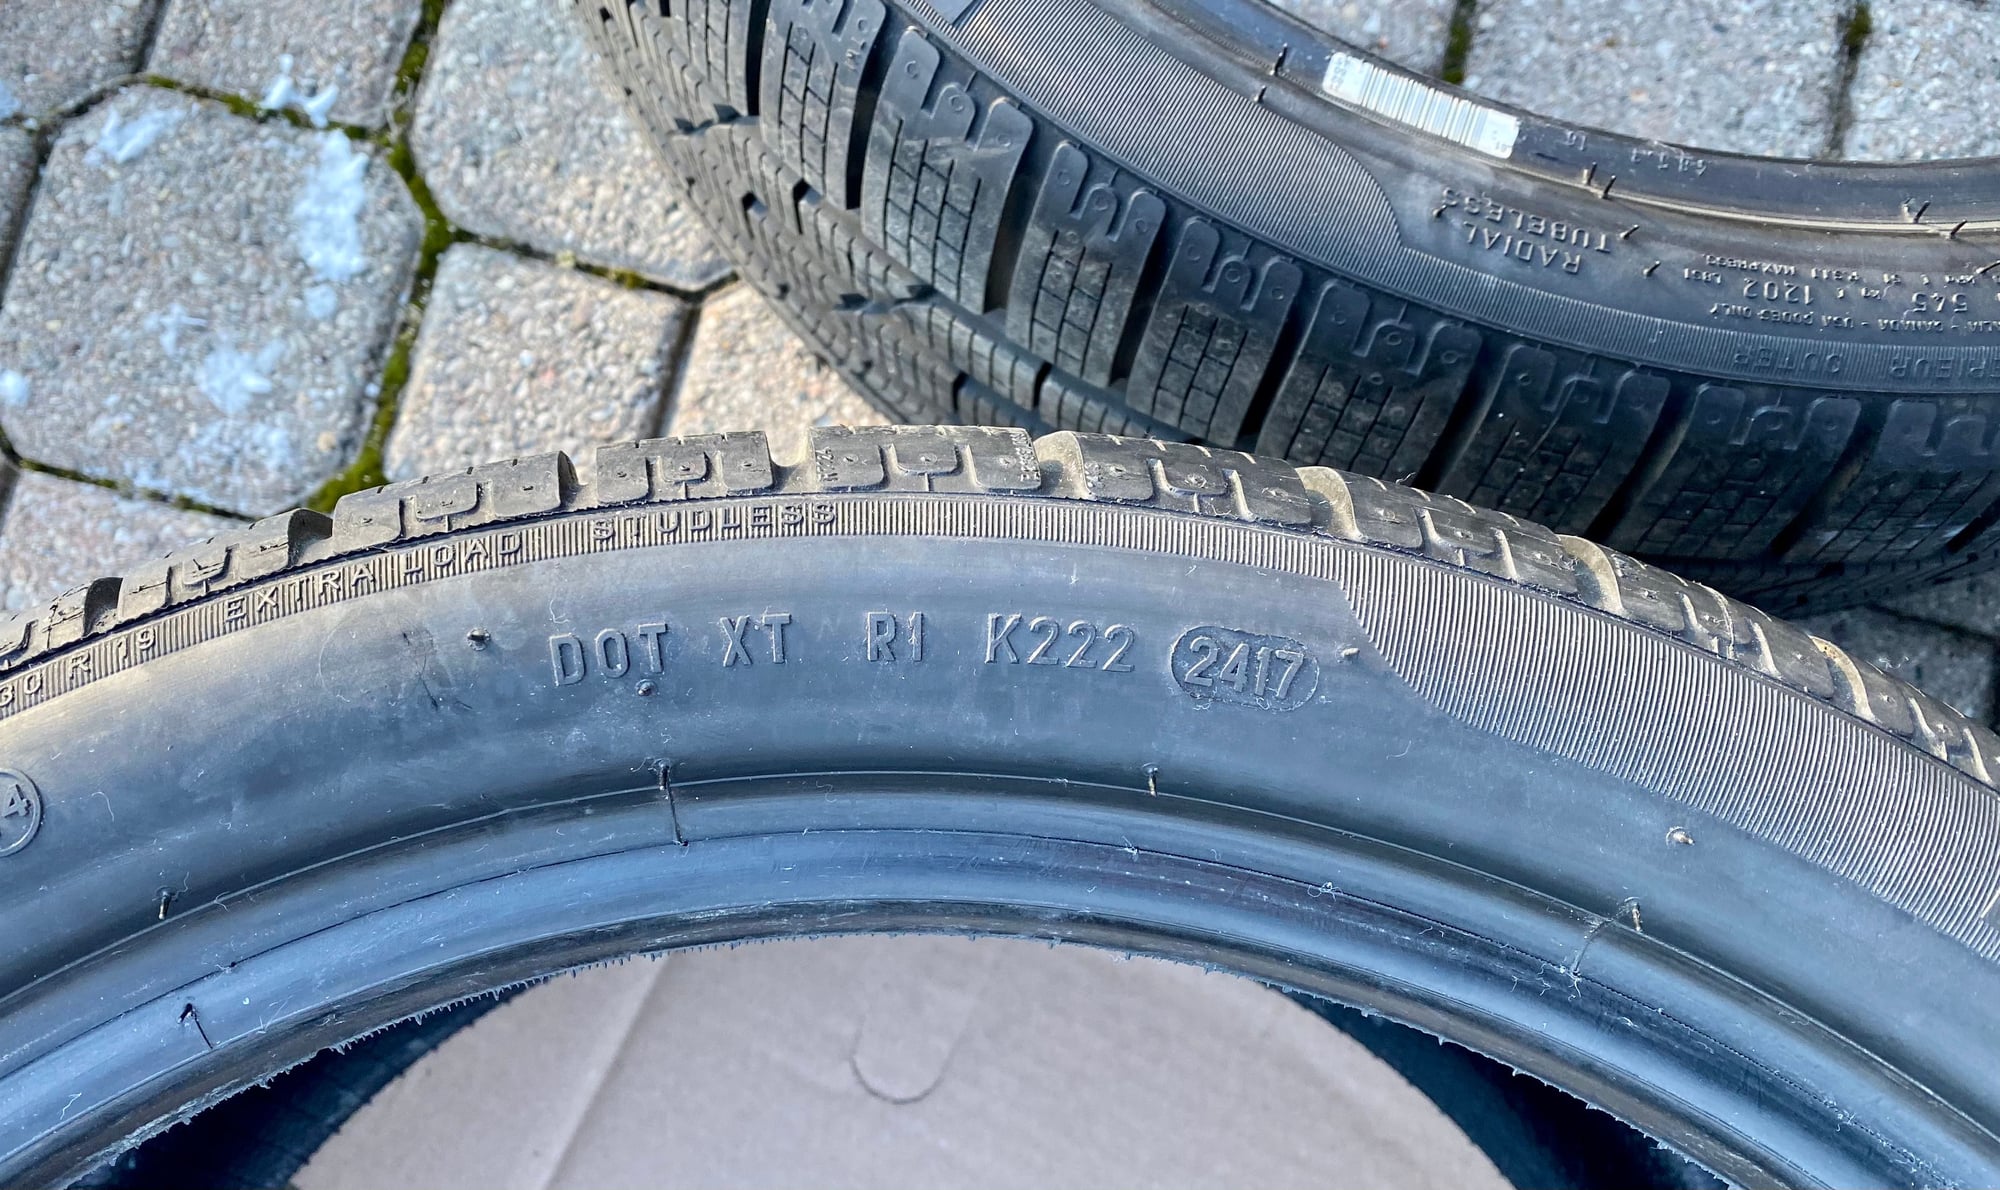 Wheels and Tires/Axles - Like New 19” Winter Tires - Used - All Years Any Make All Models - Toronto, ON M2R3N1, Canada